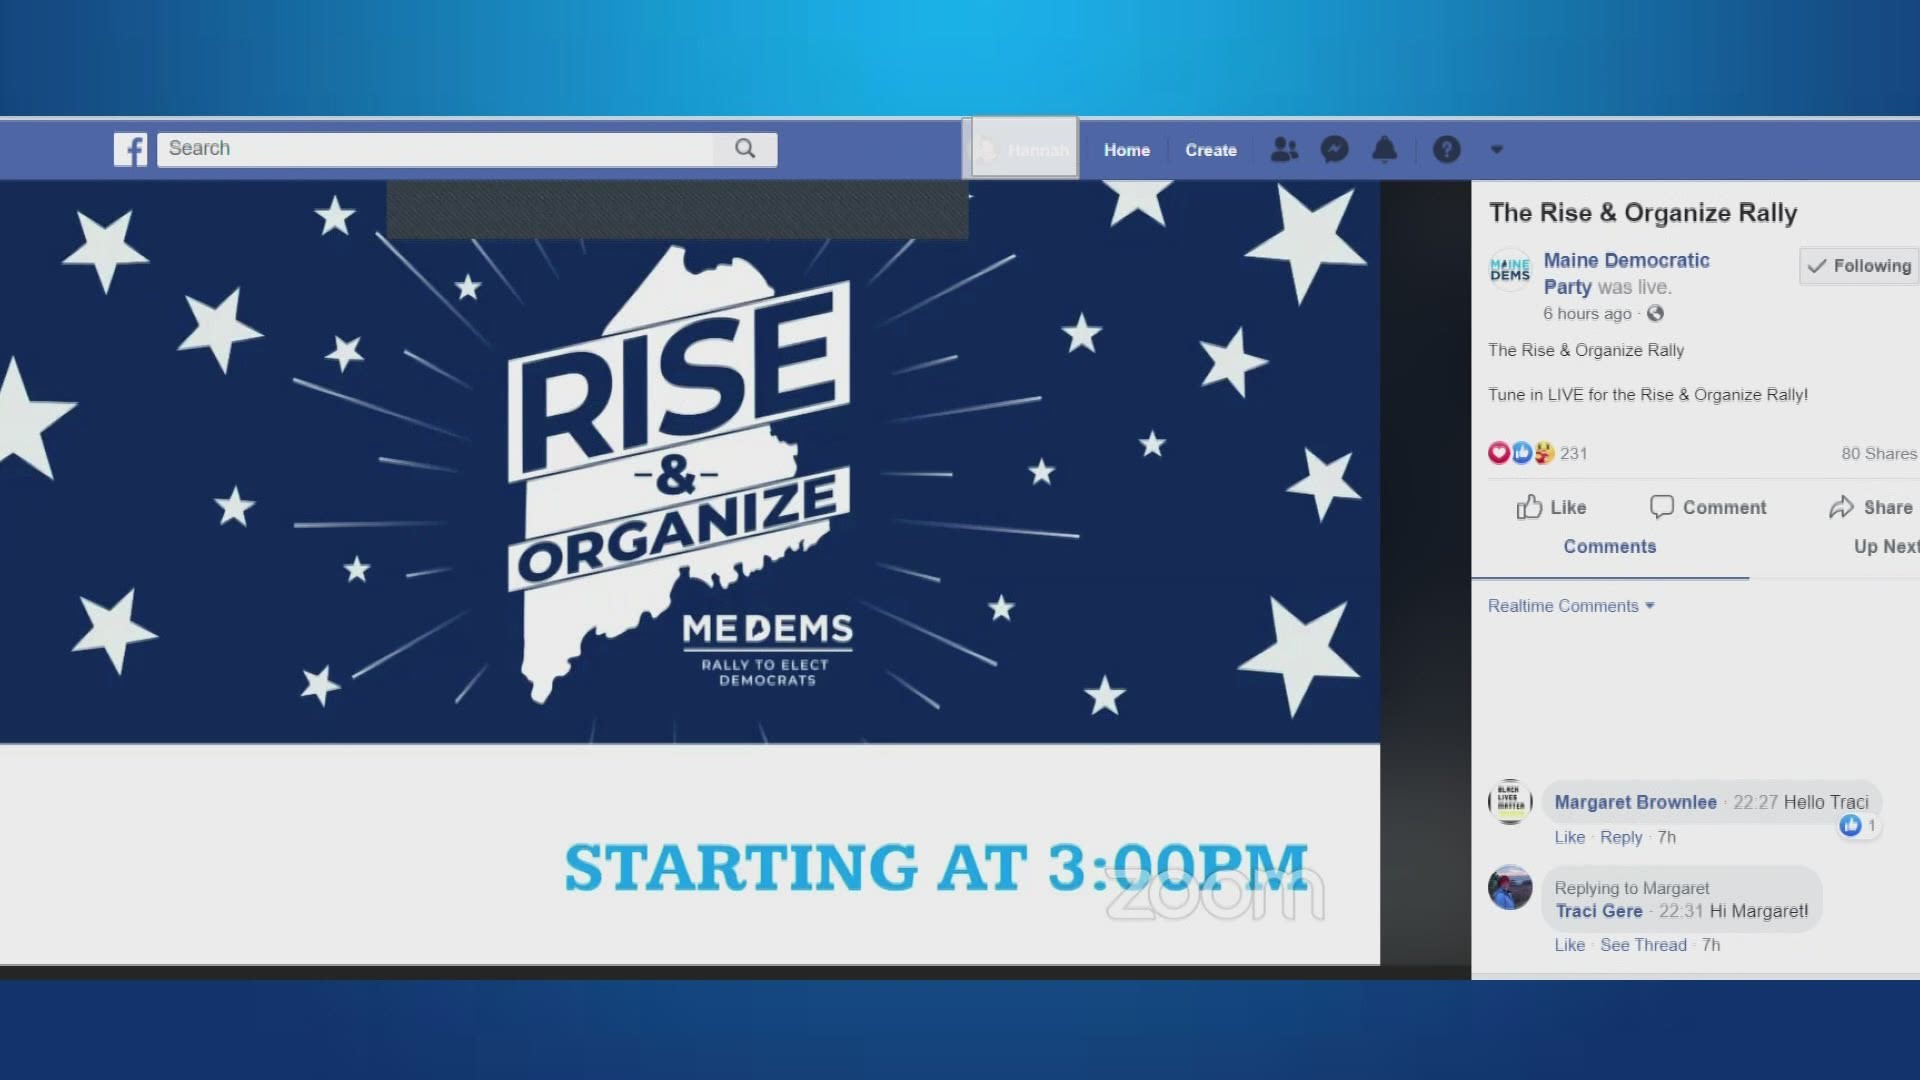 The live-streamed "Rise and Organize" rally was hosted by the Maine Democratic Party.